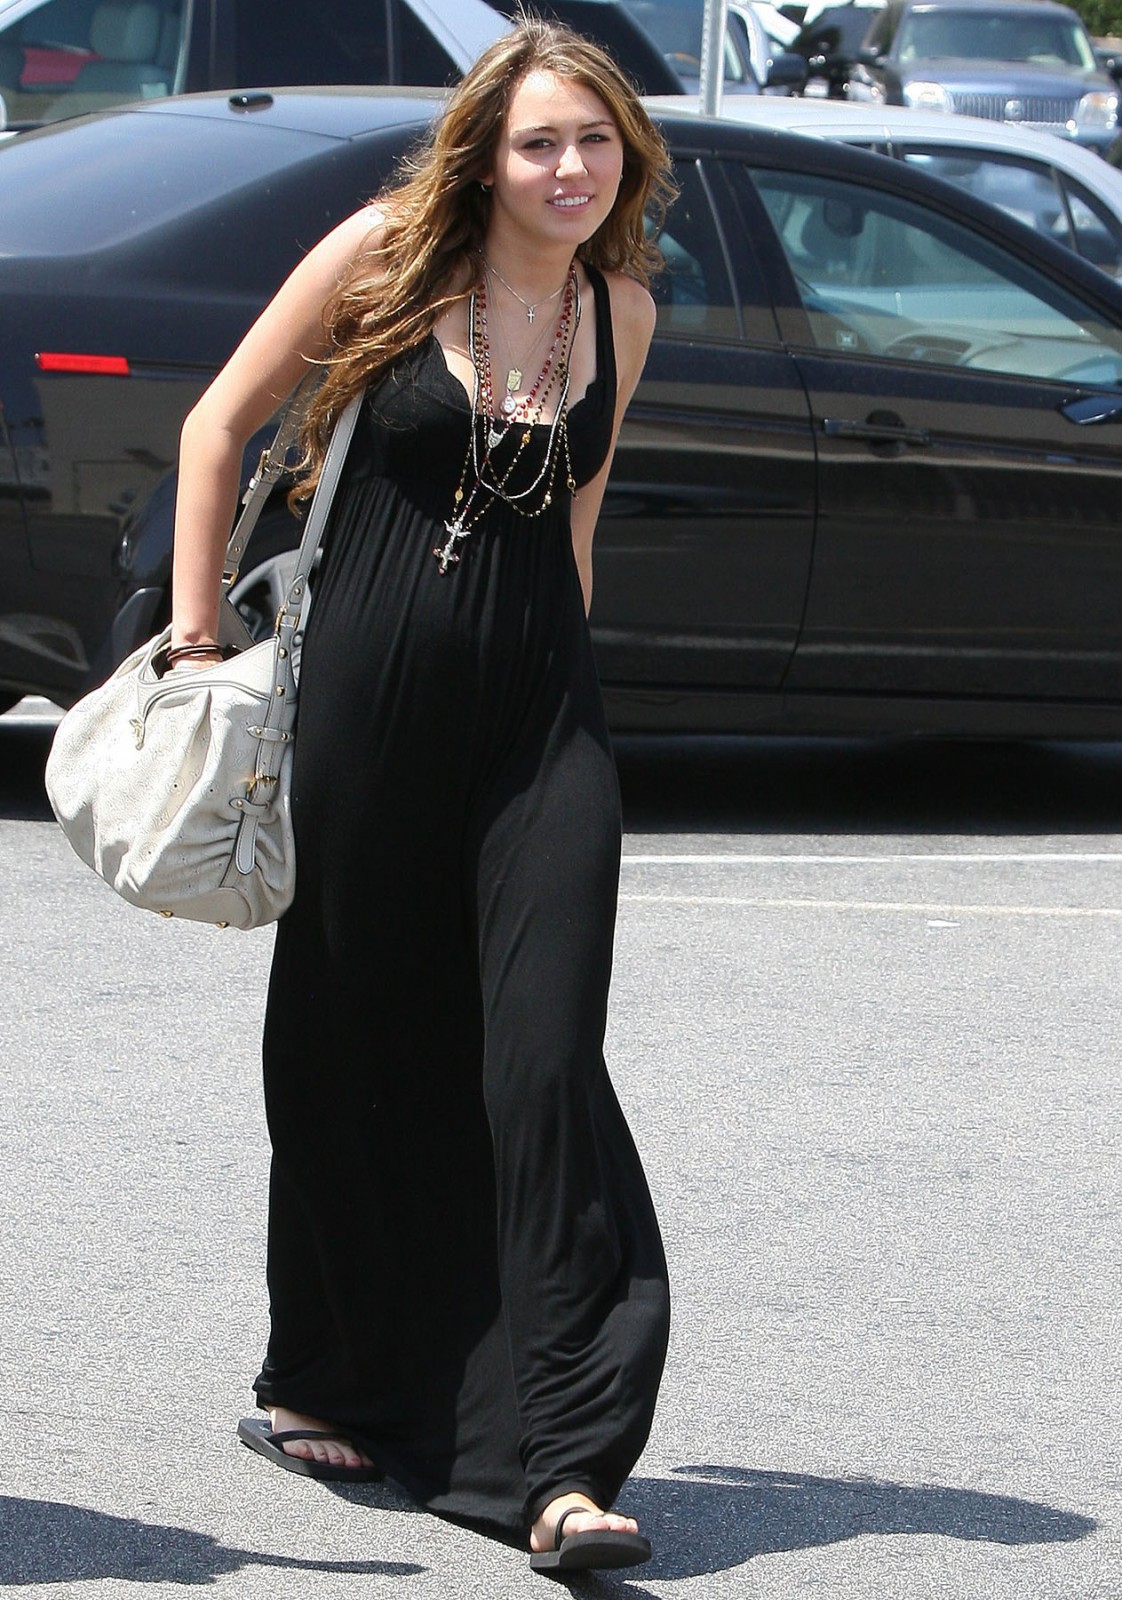 Miley-Cyrus-20090831_Out-n-About-Studio-City_May09_06375-1122x1600.jpg